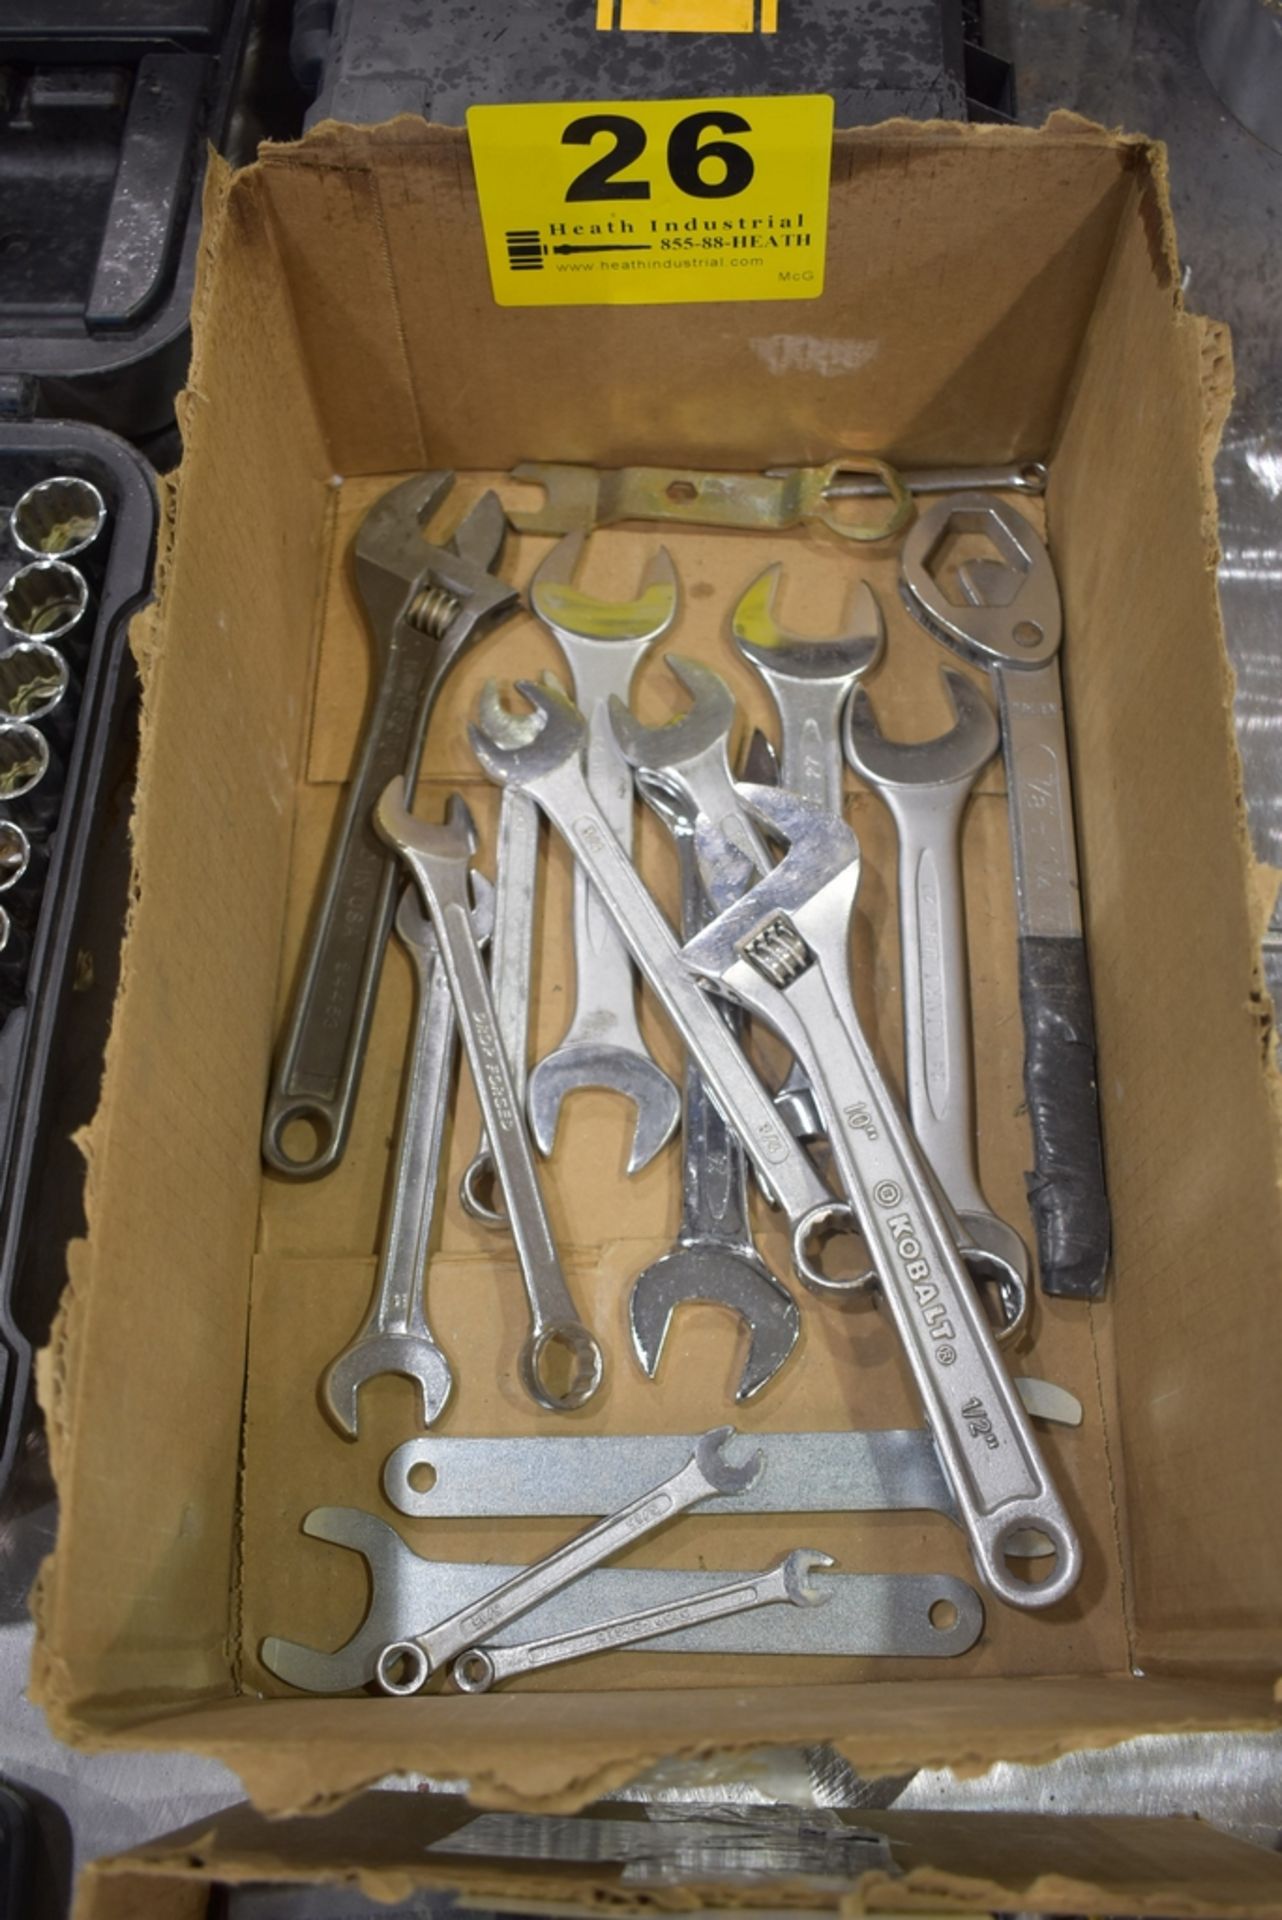 ASSORTED WRENCHES, CRESCENT WRENCHES IN BOX